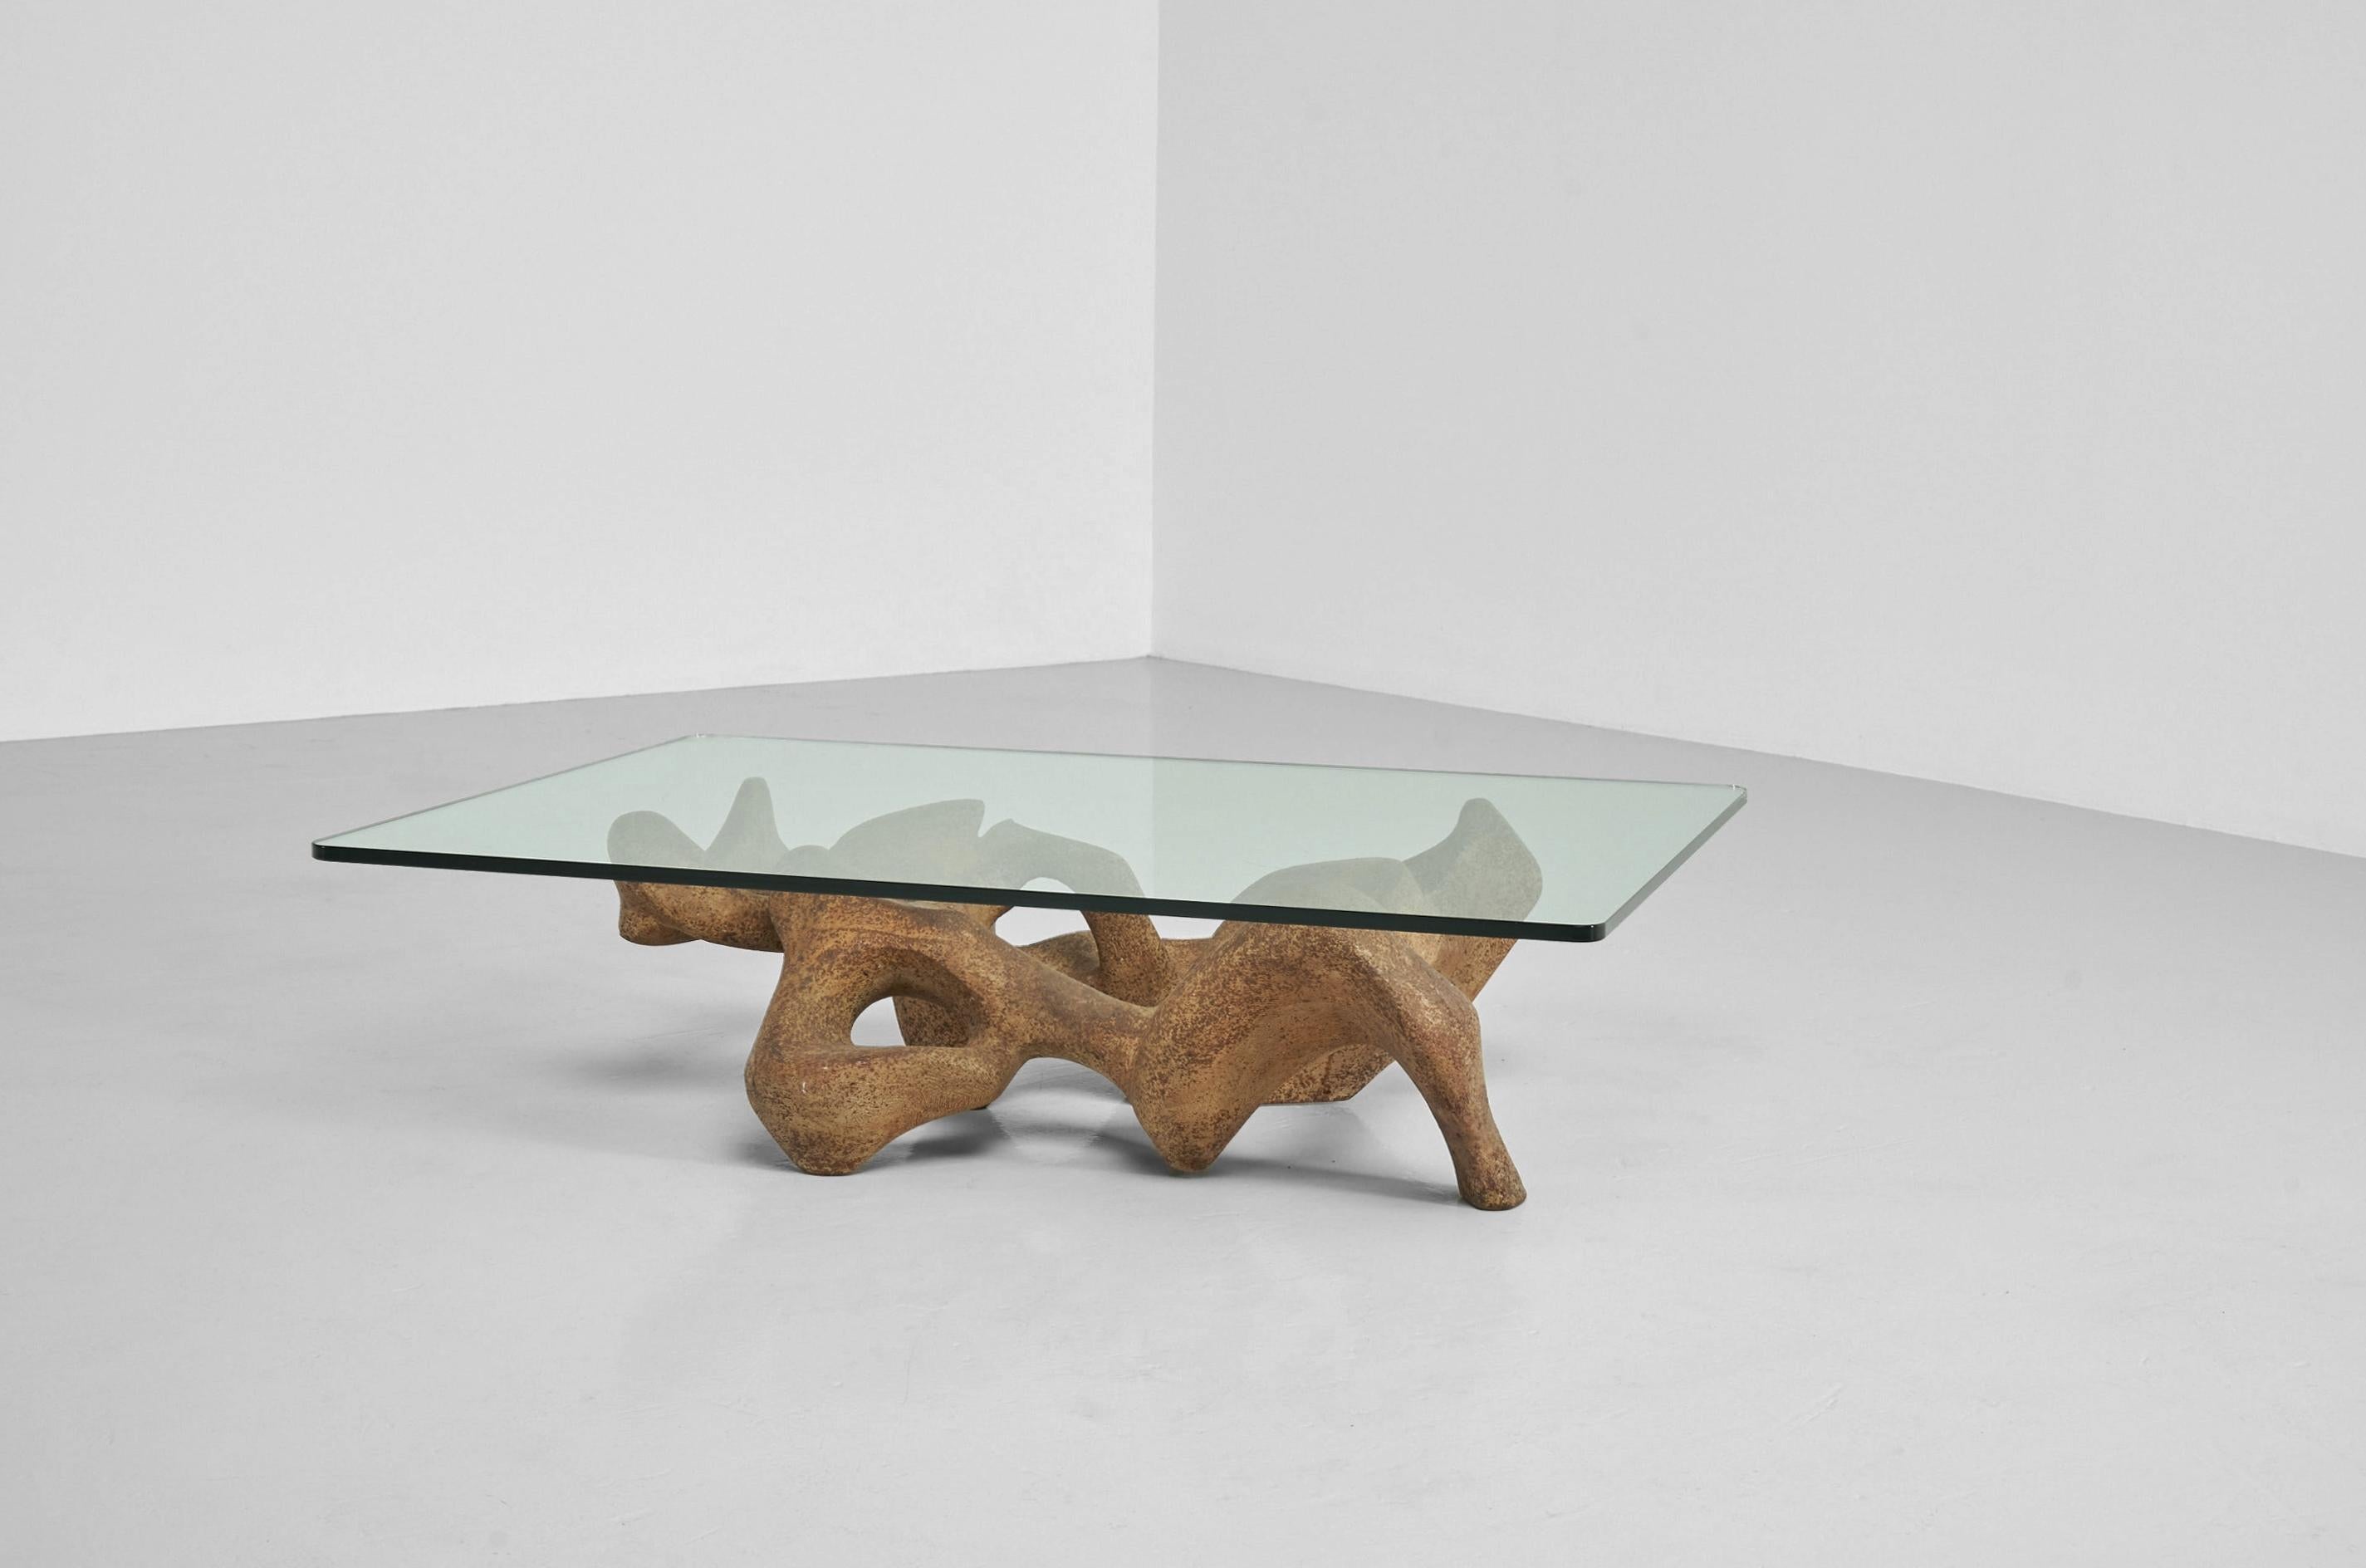 Mesmerizing sculptural coffee table made by unknown artist in Italy in the 1960s. The table looks interesting from every angle, in some ways it looks like a female body which supports the tabletop, from another angle your imagination makes it